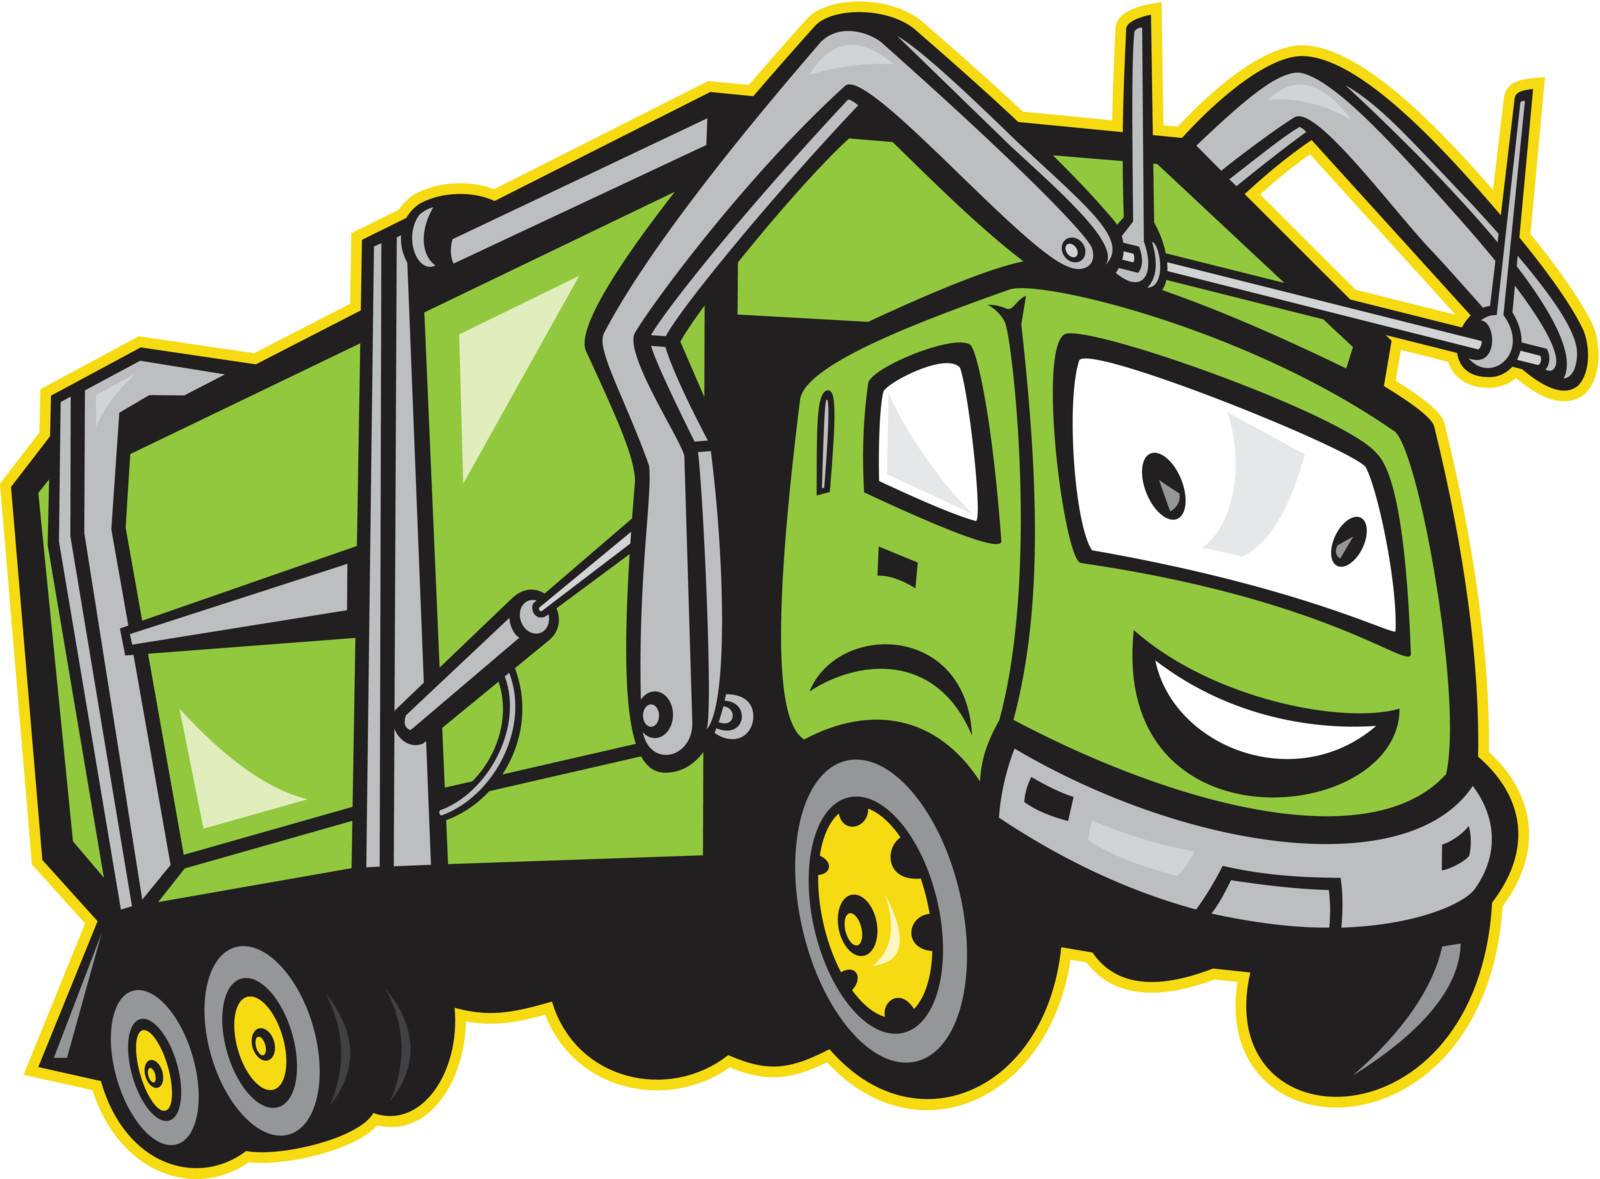 Illustration of garbage rubbish truck done in cartoon style on isolated white background.